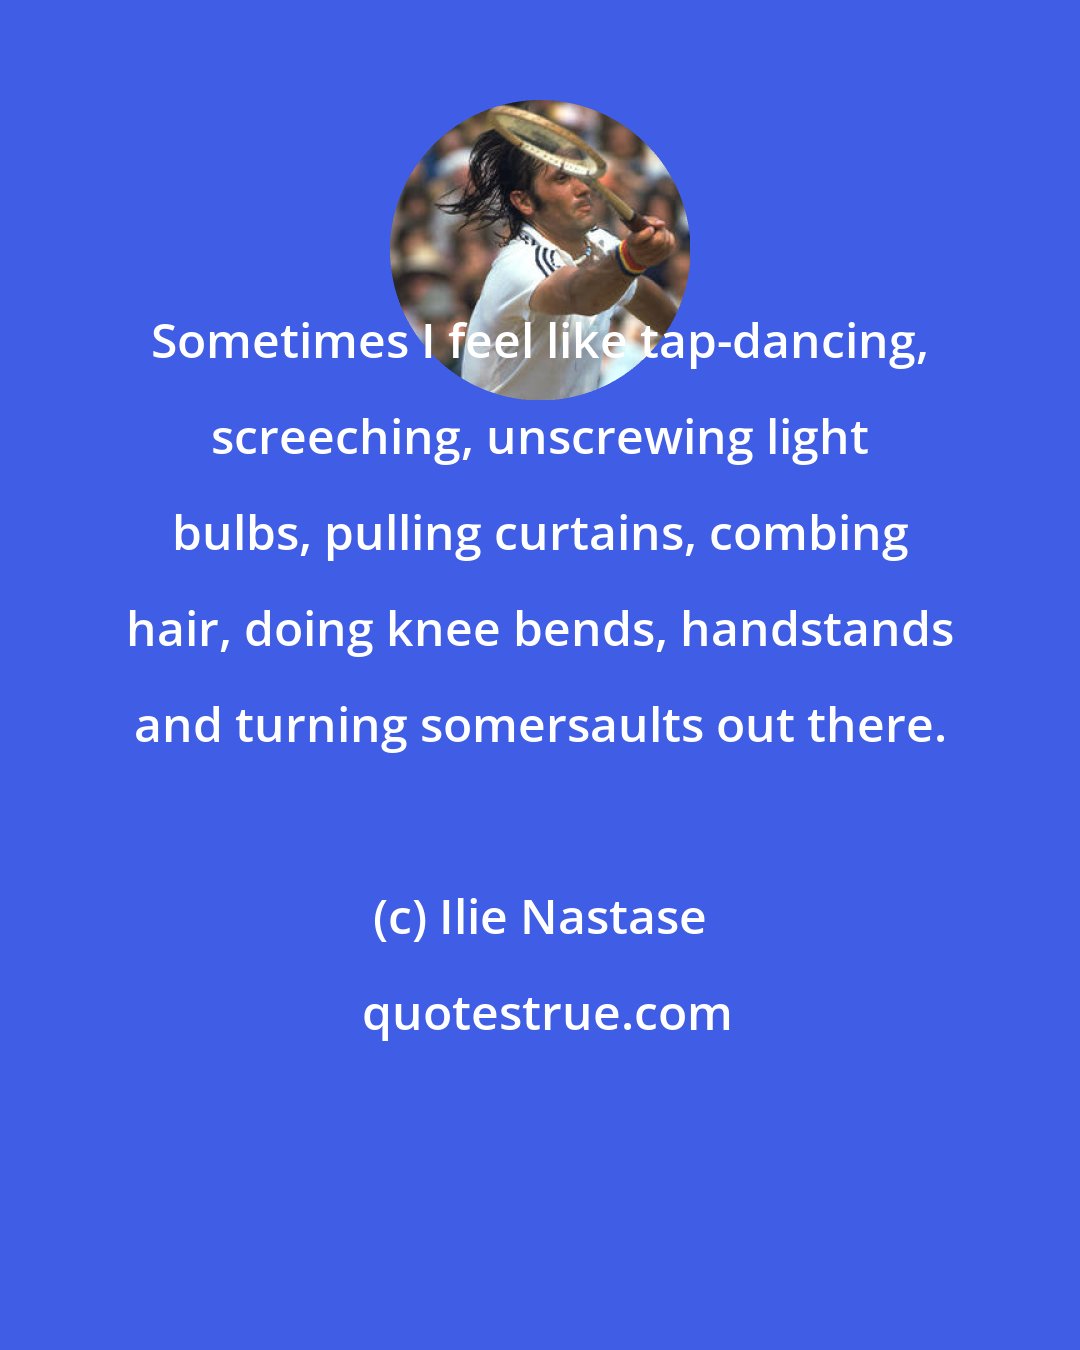 Ilie Nastase: Sometimes I feel like tap-dancing, screeching, unscrewing light bulbs, pulling curtains, combing hair, doing knee bends, handstands and turning somersaults out there.